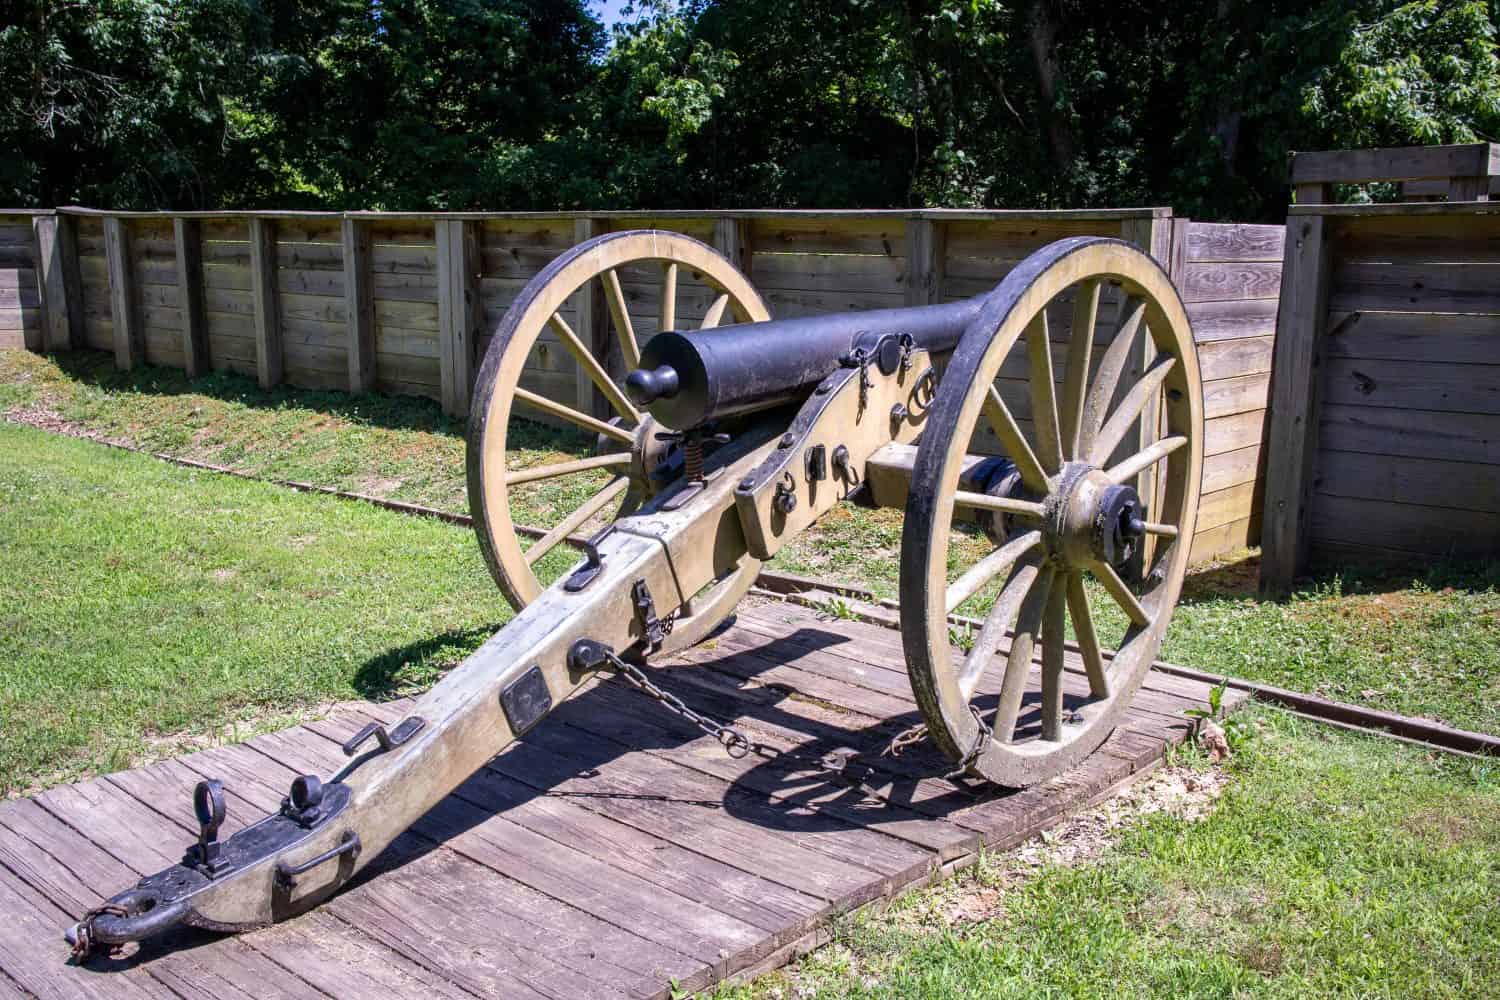 A civil war era cannon on display behind the barricade in Fort Pillow State Historic Park.